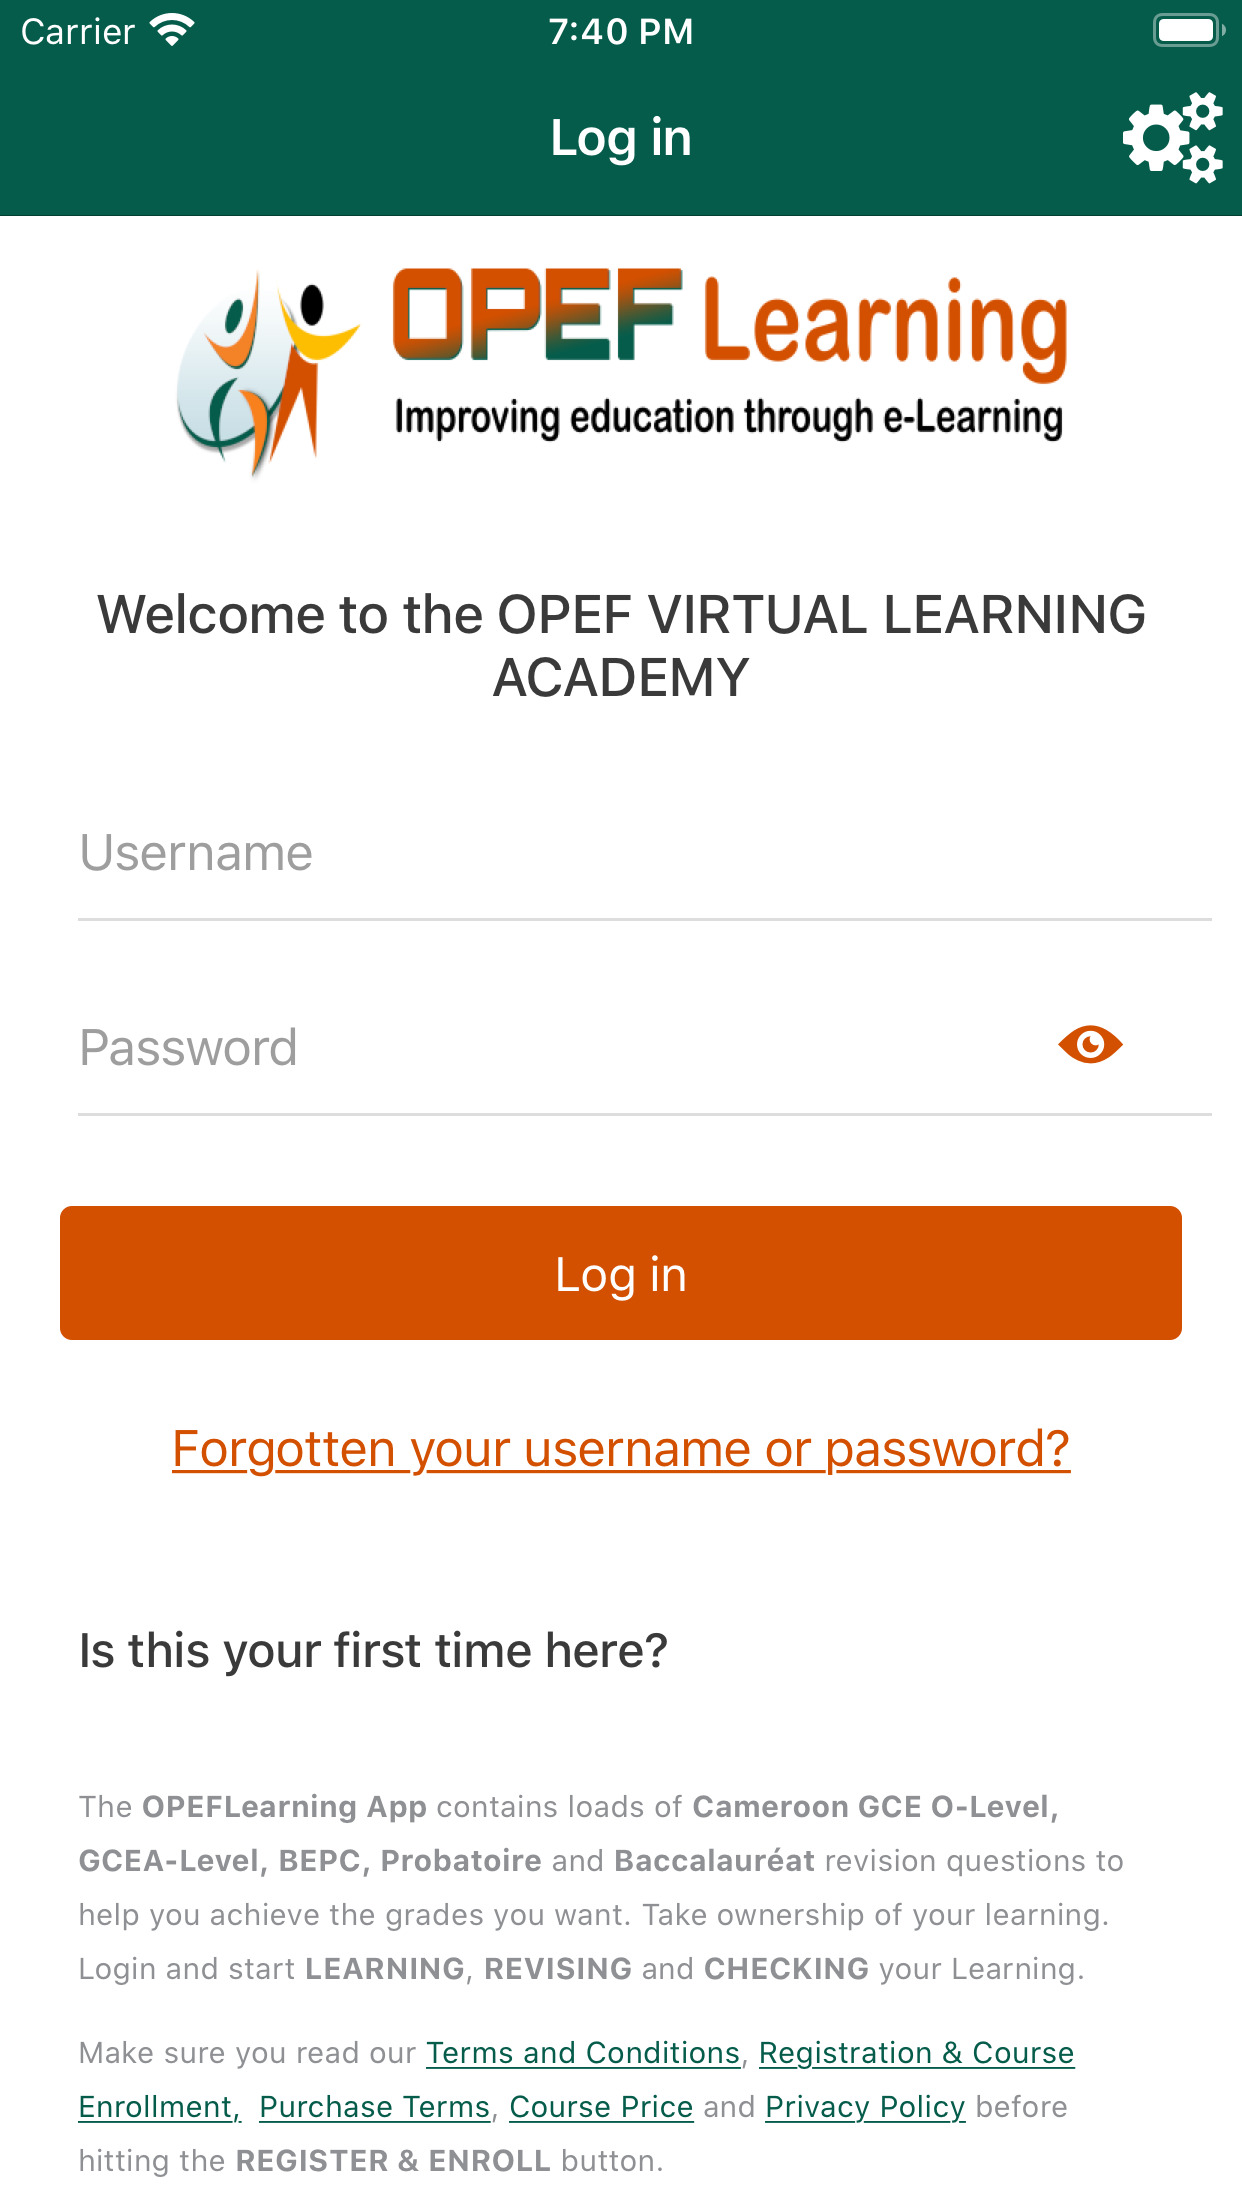 Project image for OPEF Learning